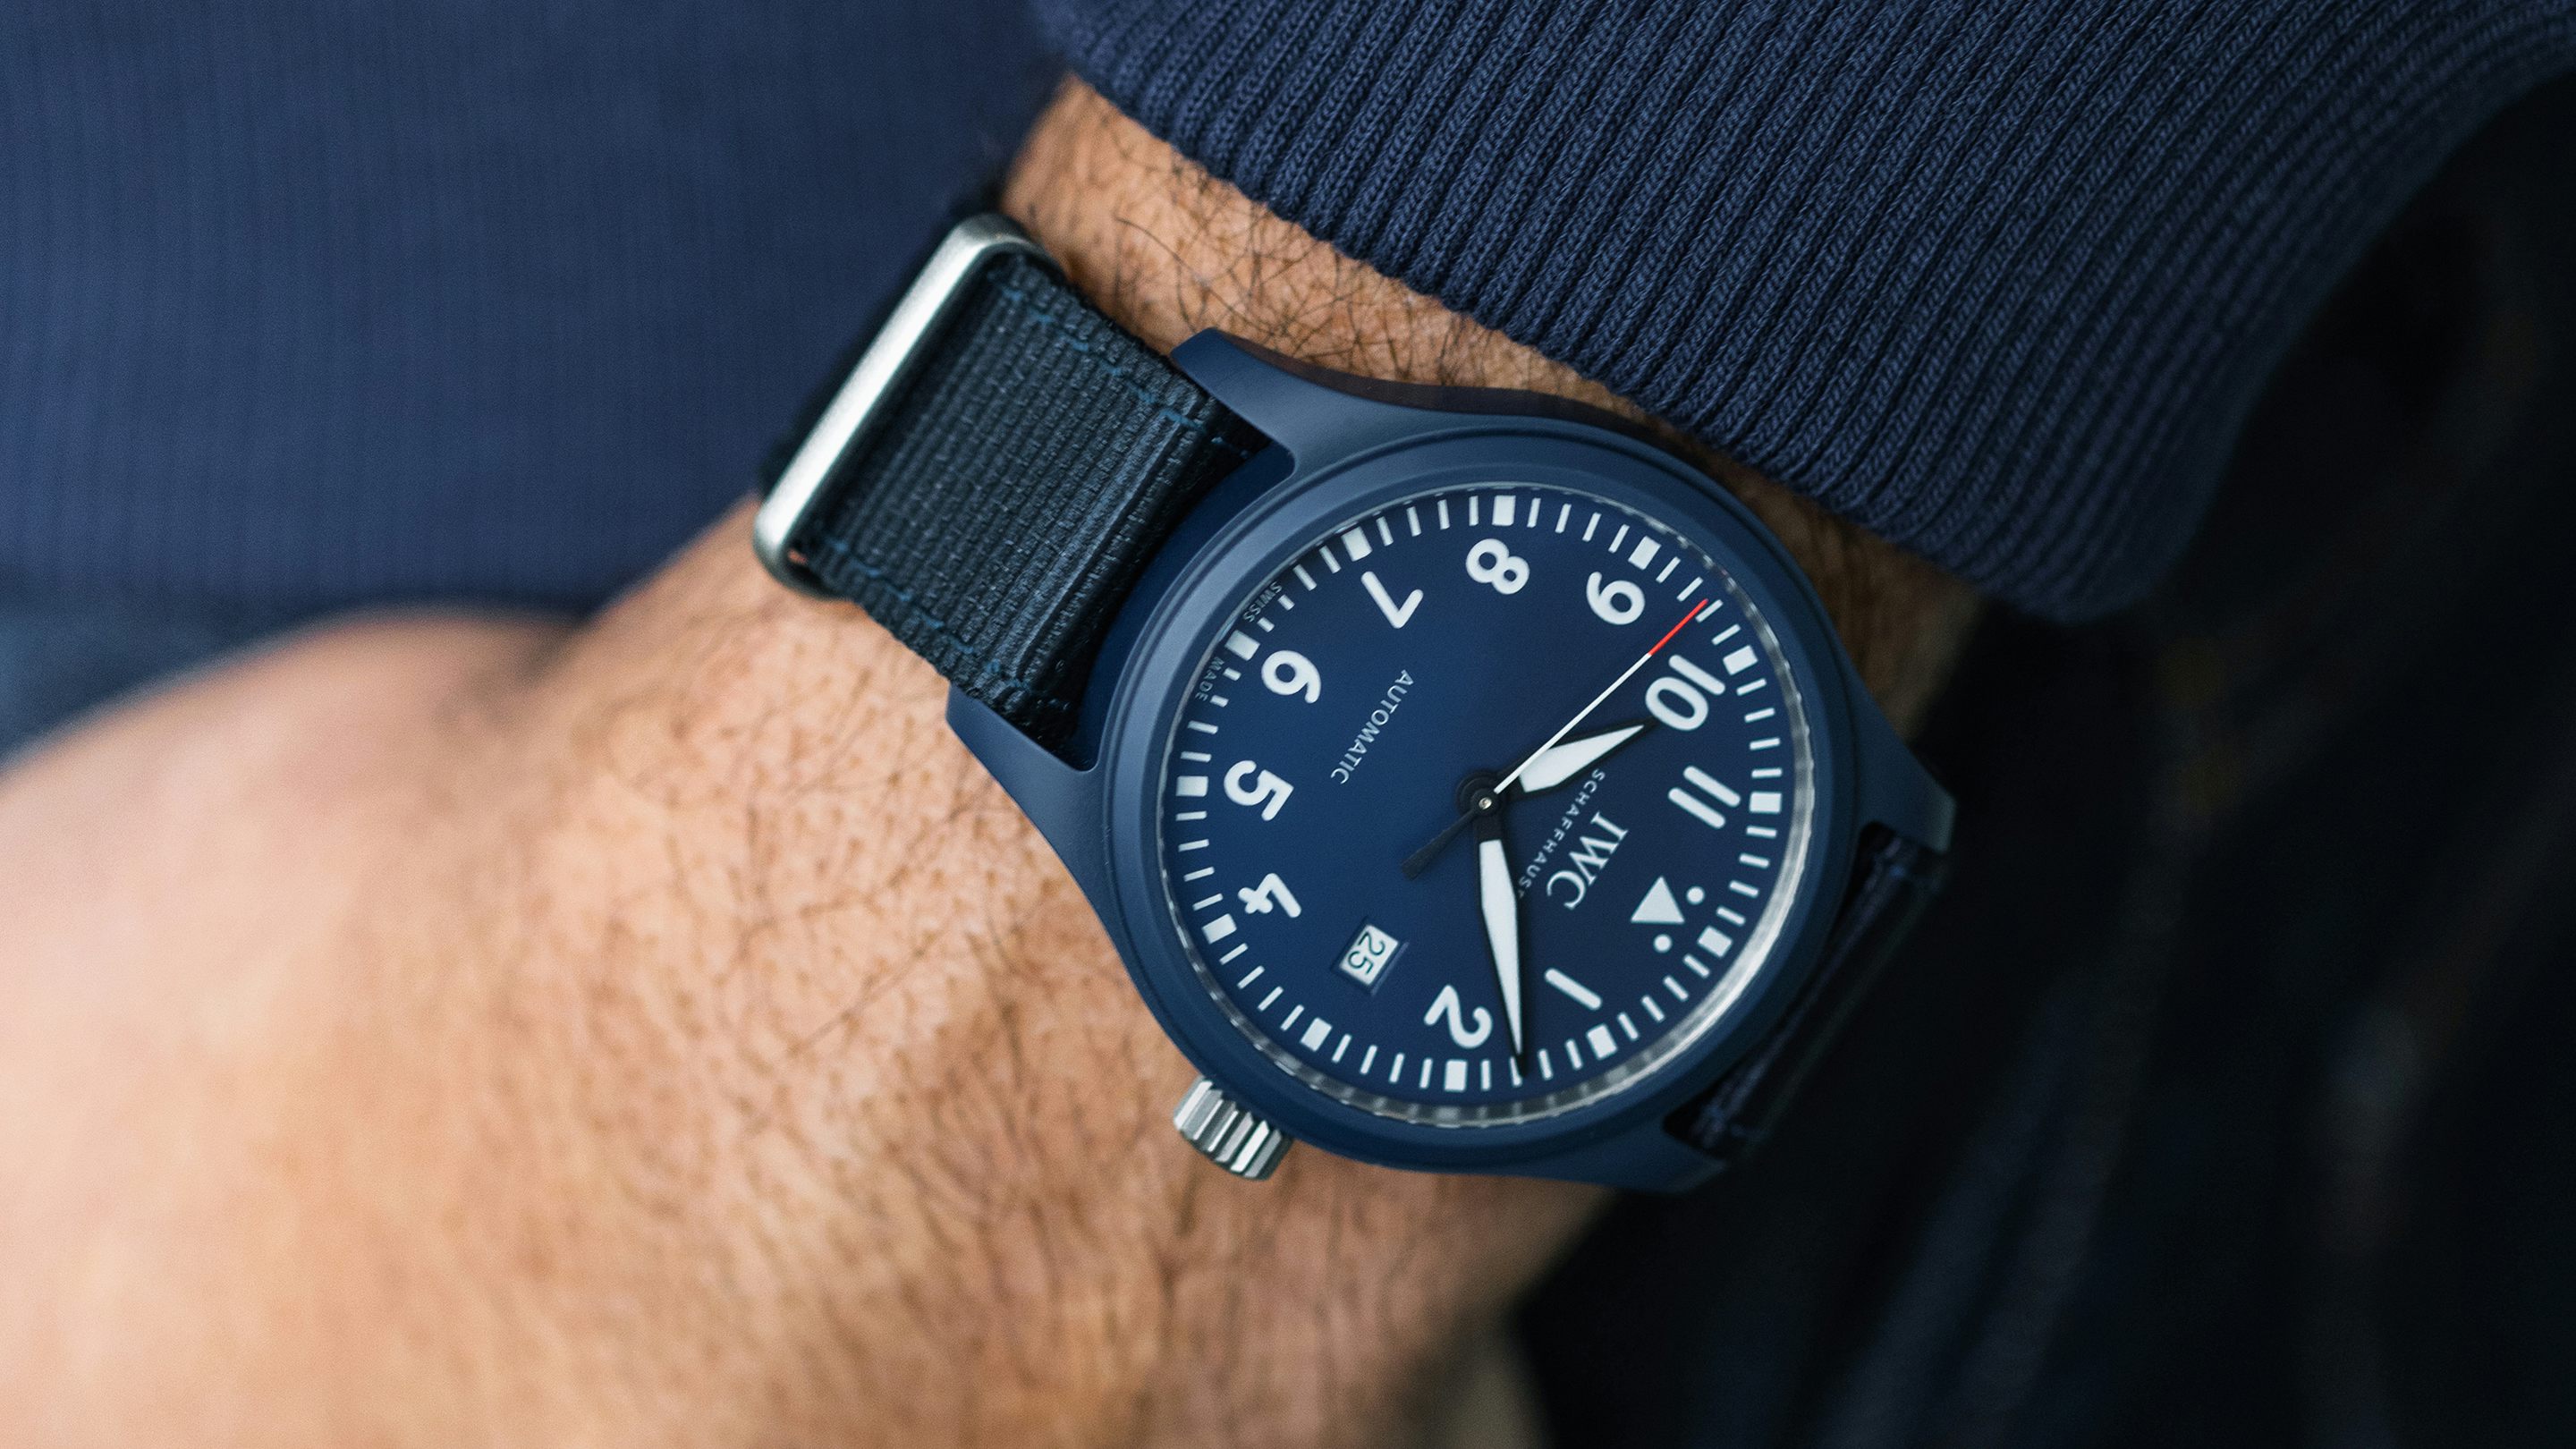 A New Blue Ceramic Watch From IWC